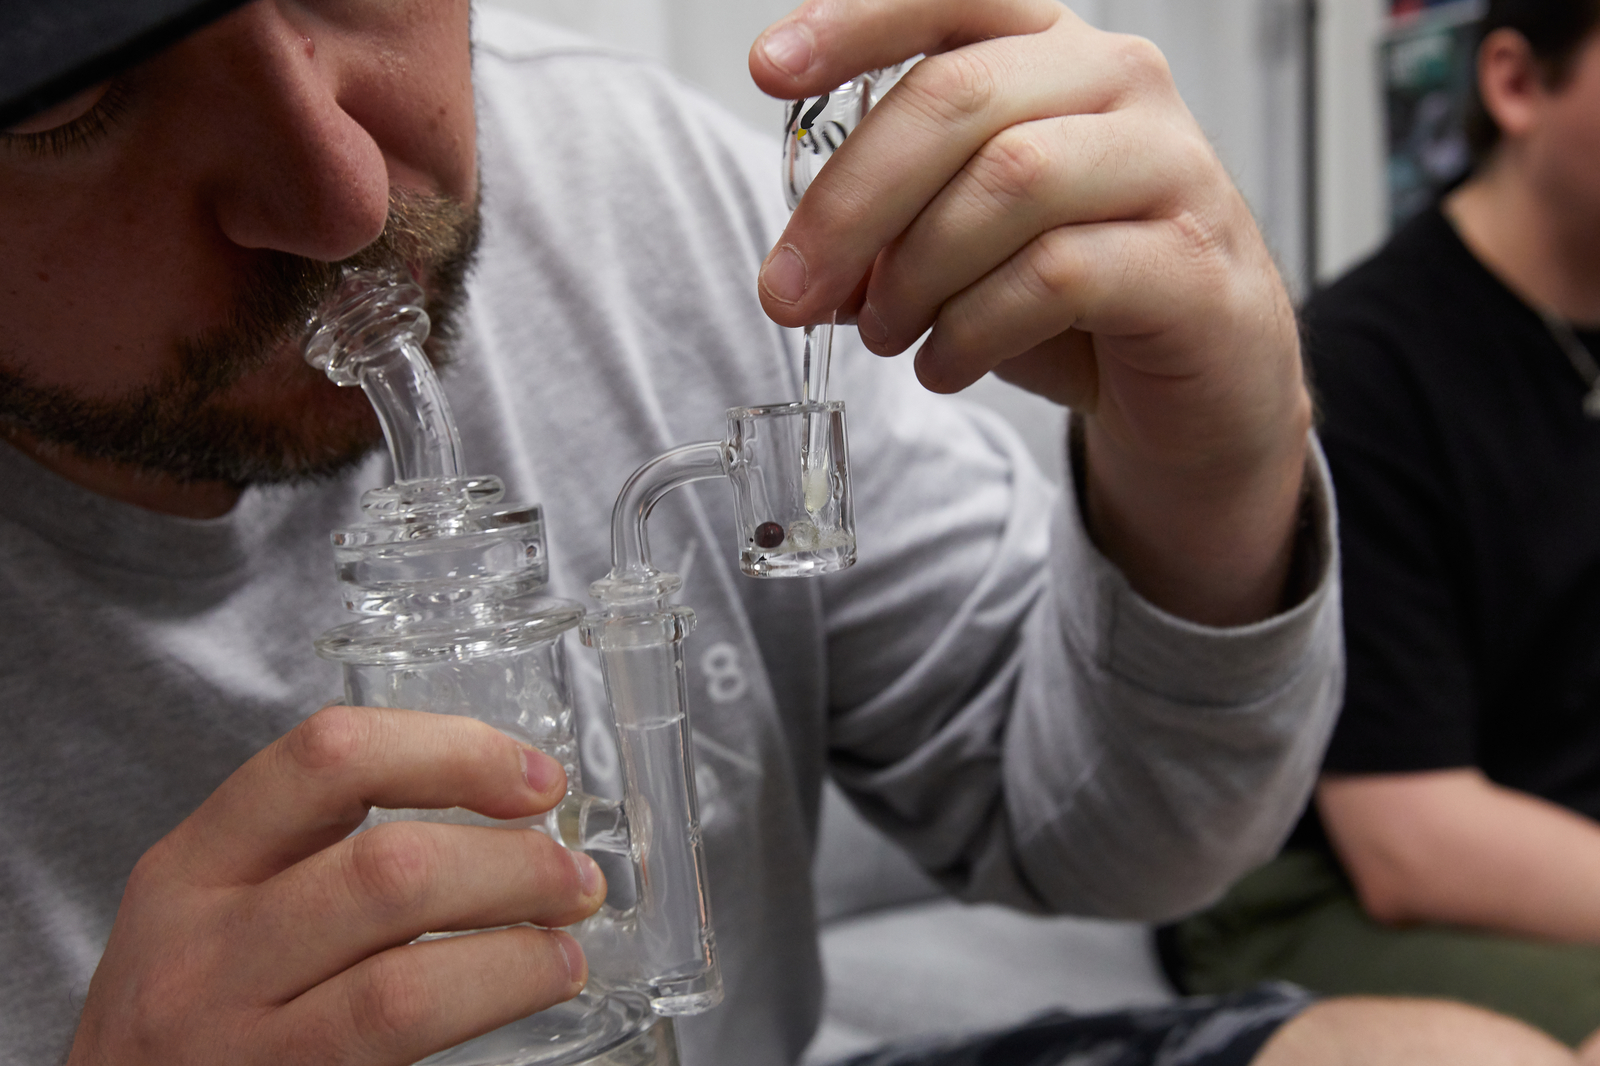 Dabbing: A Guide On How to Use a Dab Rig